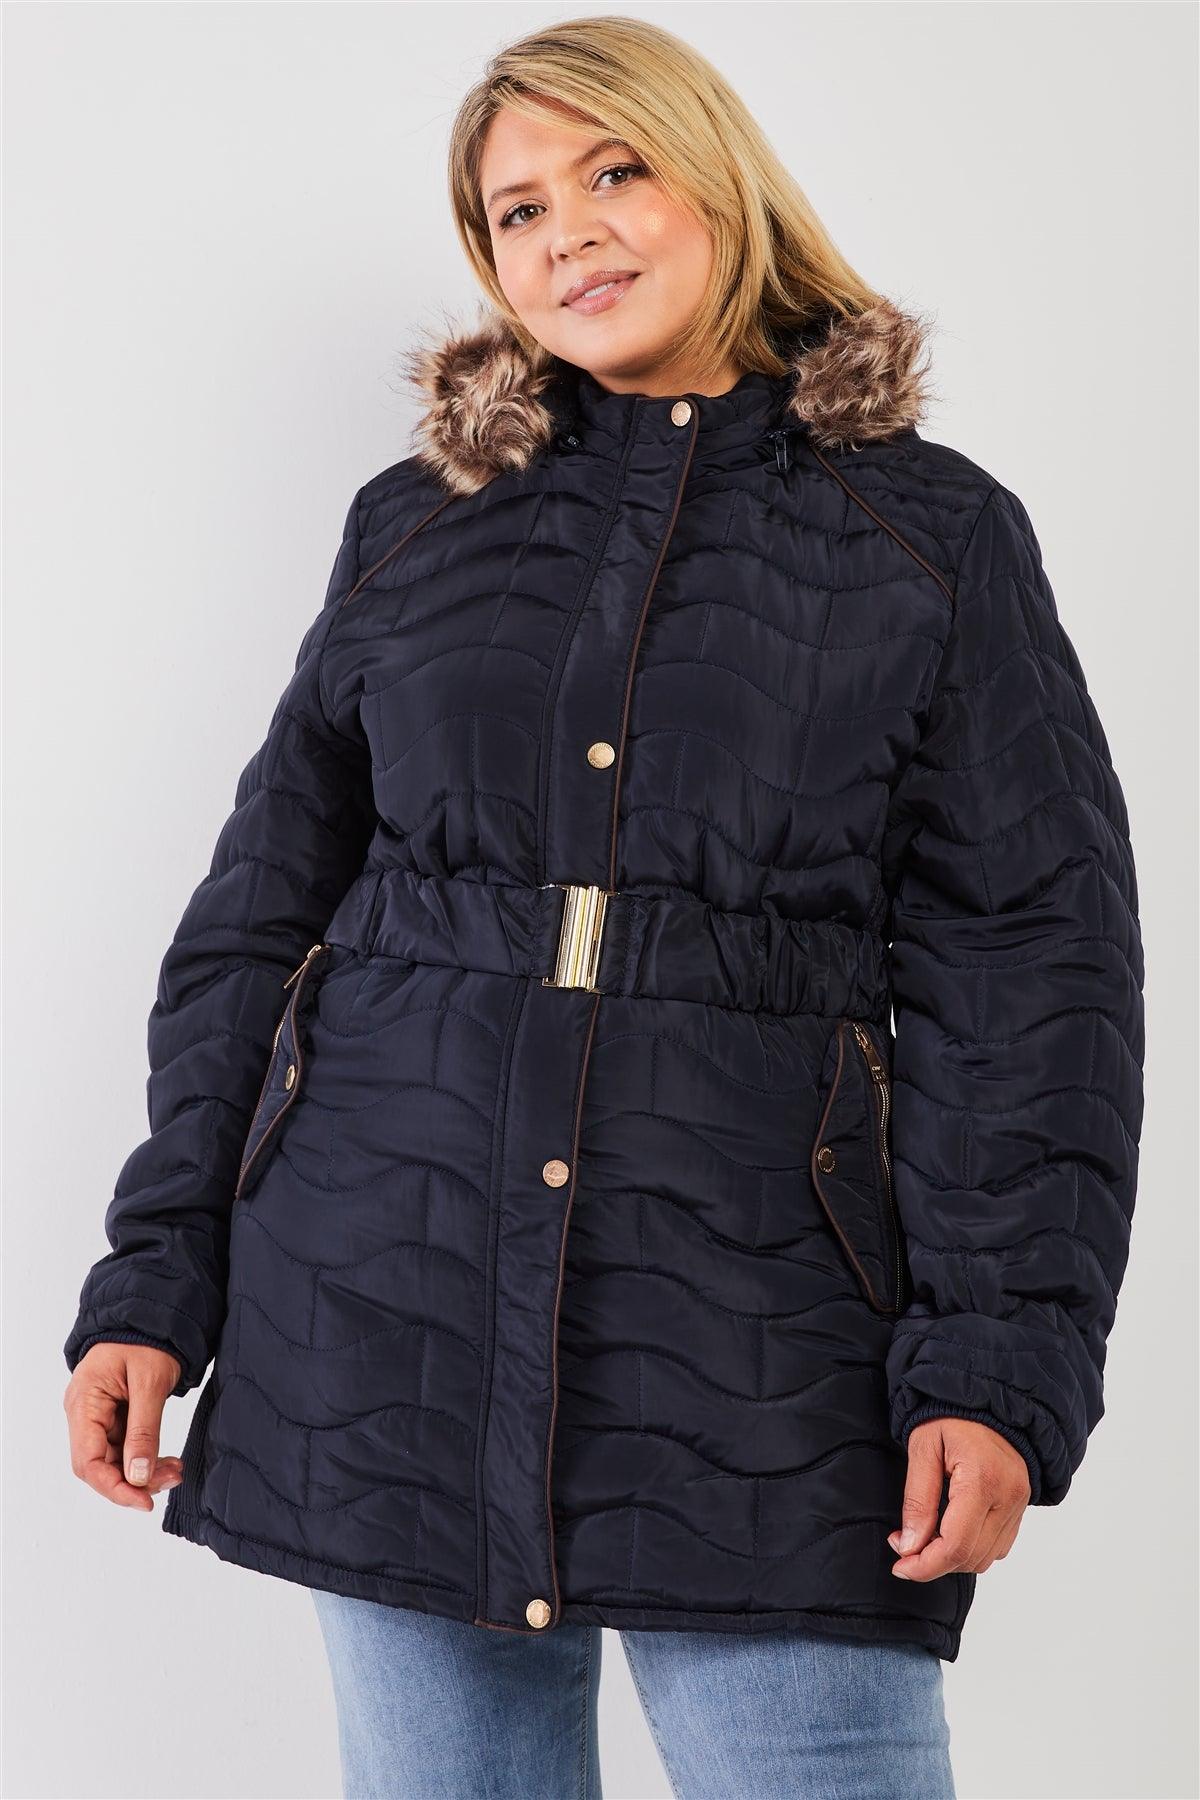 Junior Plus Navy Wavy Brick Quilt Faux Fur Hood Belted Padded Long Puffer Jacket /1-1-1-1